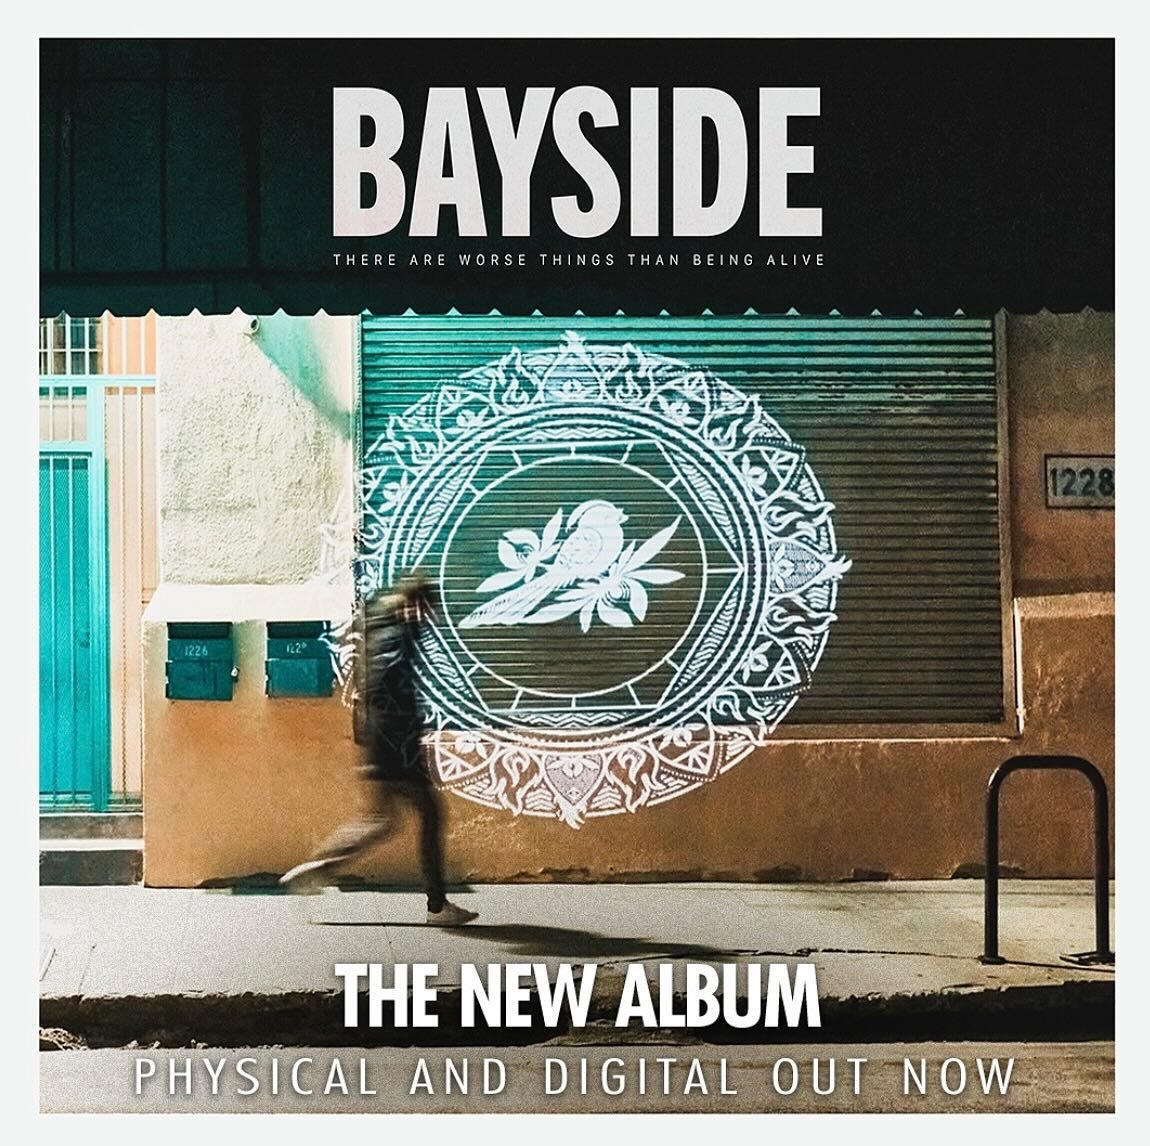 The new album from @bayside - There Are Worse Things Than Being Alive - now on vinyl and CD at&nbsp;@ziarecords,&nbsp;@bullmoosestores,&nbsp;@afkbooksandrecords,&nbsp;@looneytunescds&nbsp;&amp; your favorite record store!&nbsp;

Happy listening 🎵🎶